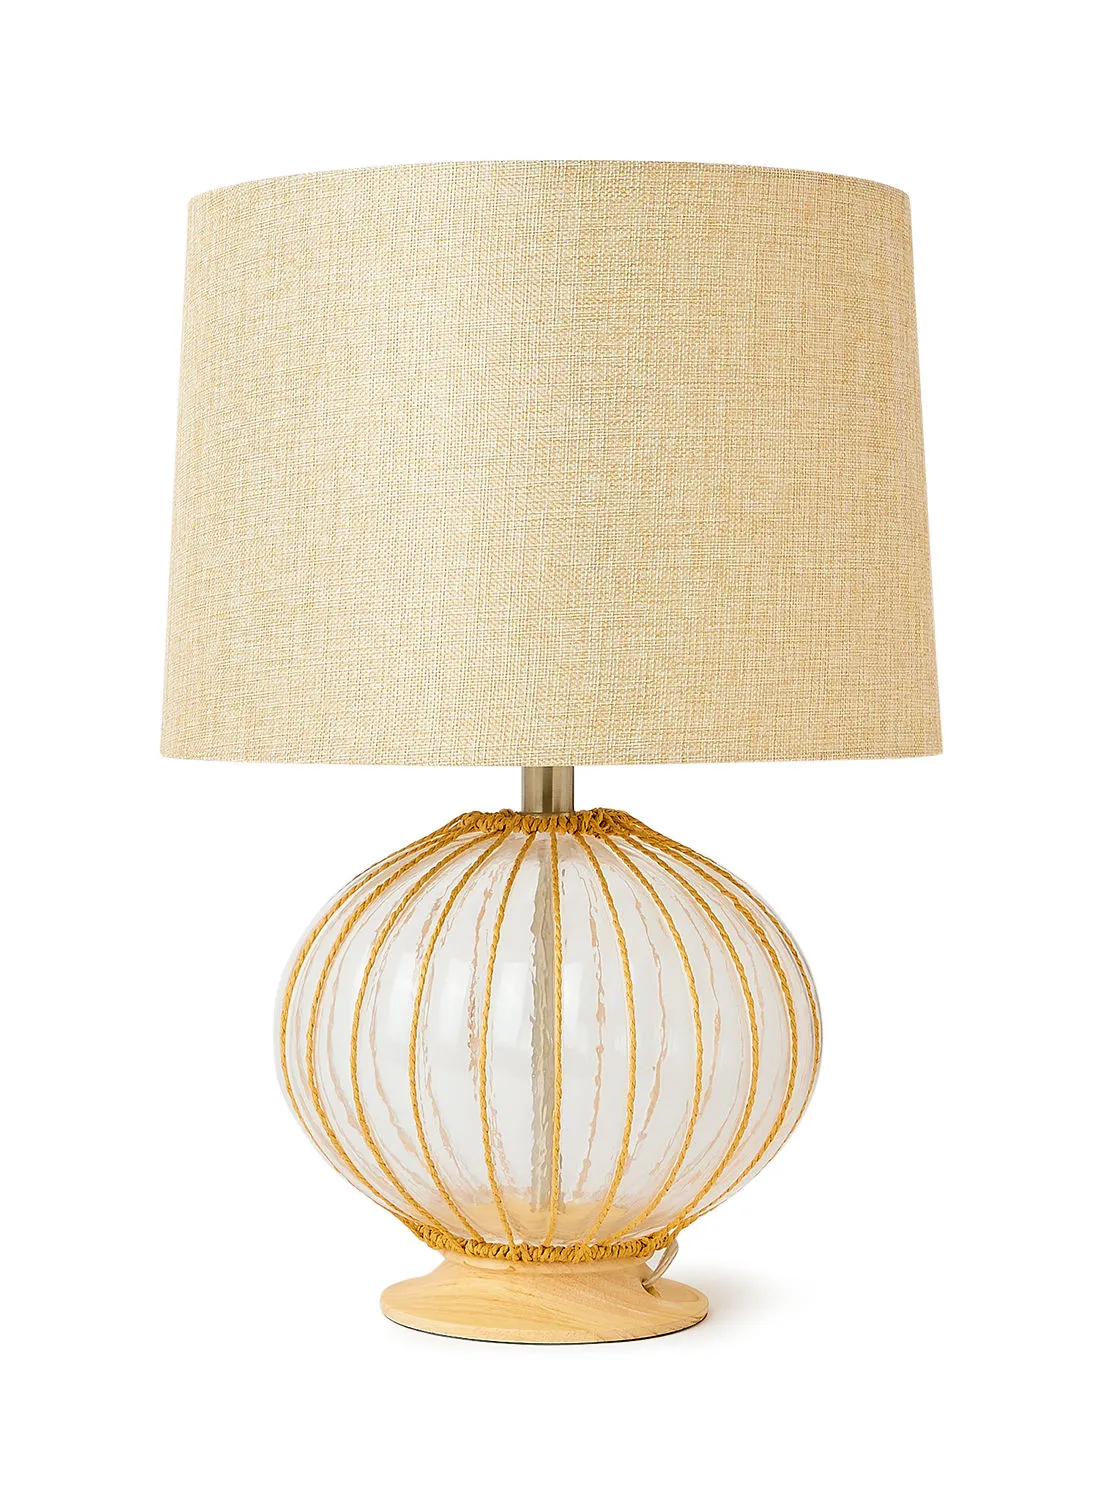 ebb & flow Cord Table Lamp | Lampshade Unique Luxury Qaulaity Material For Stylish Homes